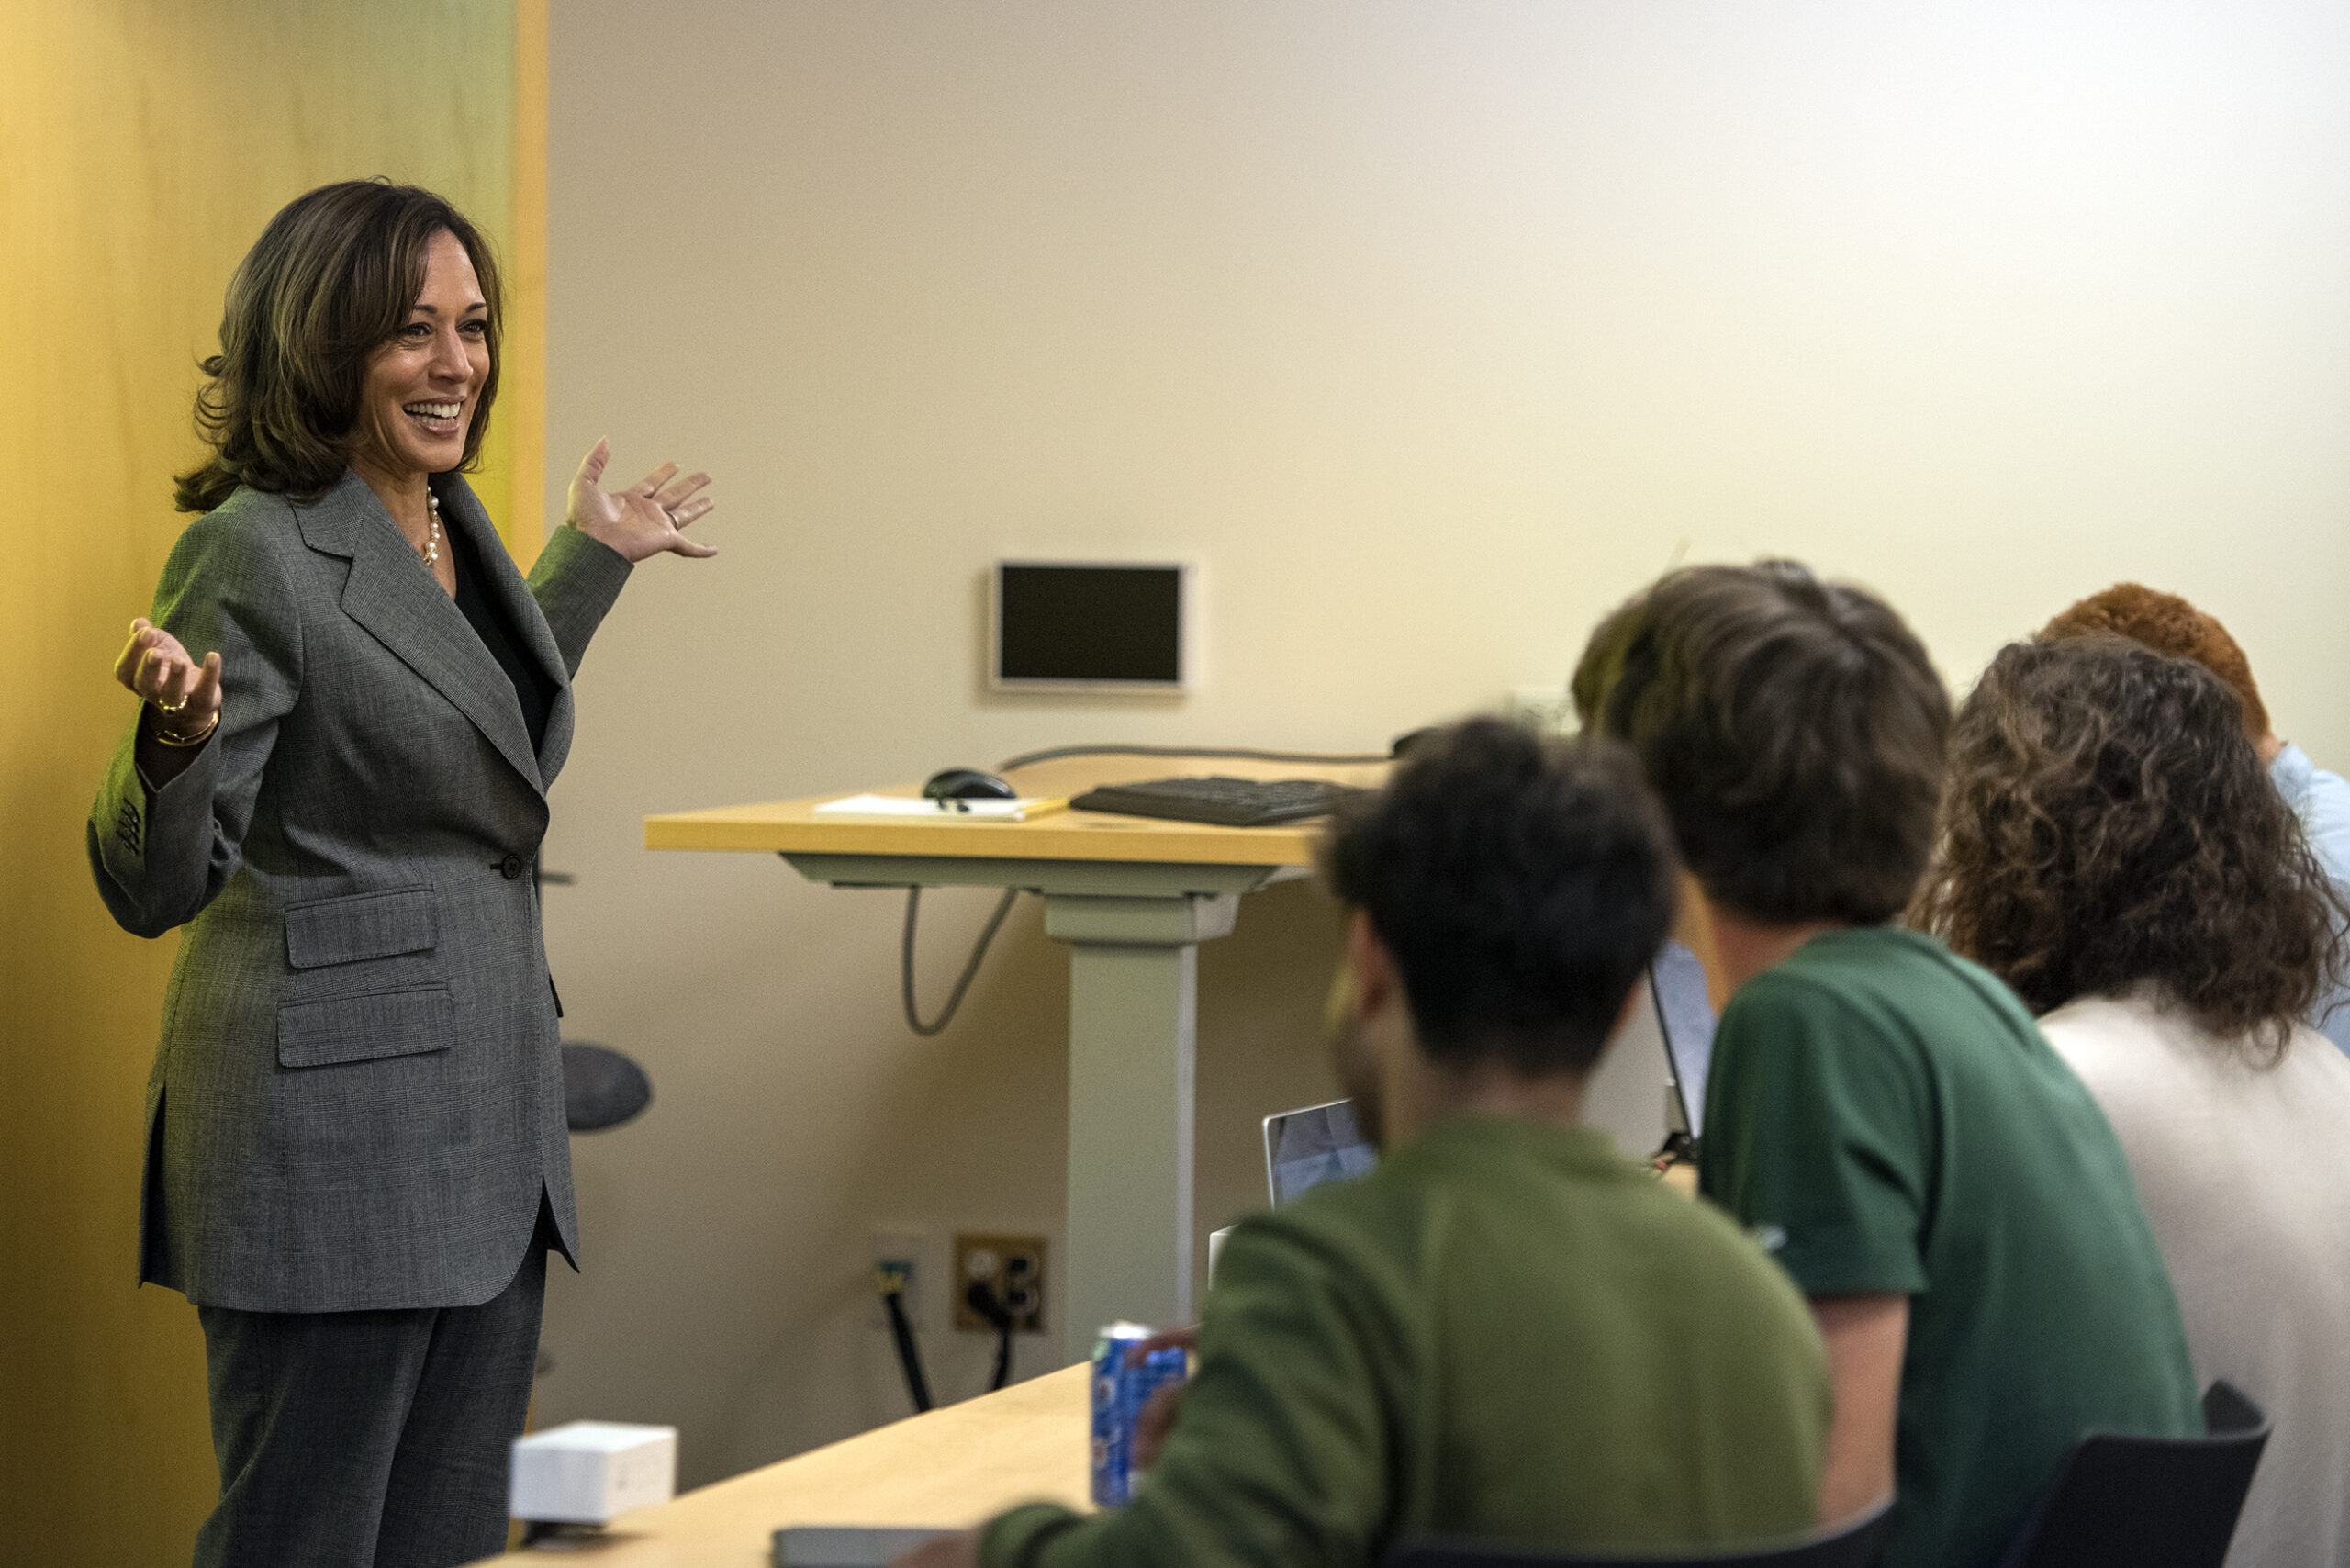 Vice President Kamala Harris gestures with her hands while speaking to students in a classroom.